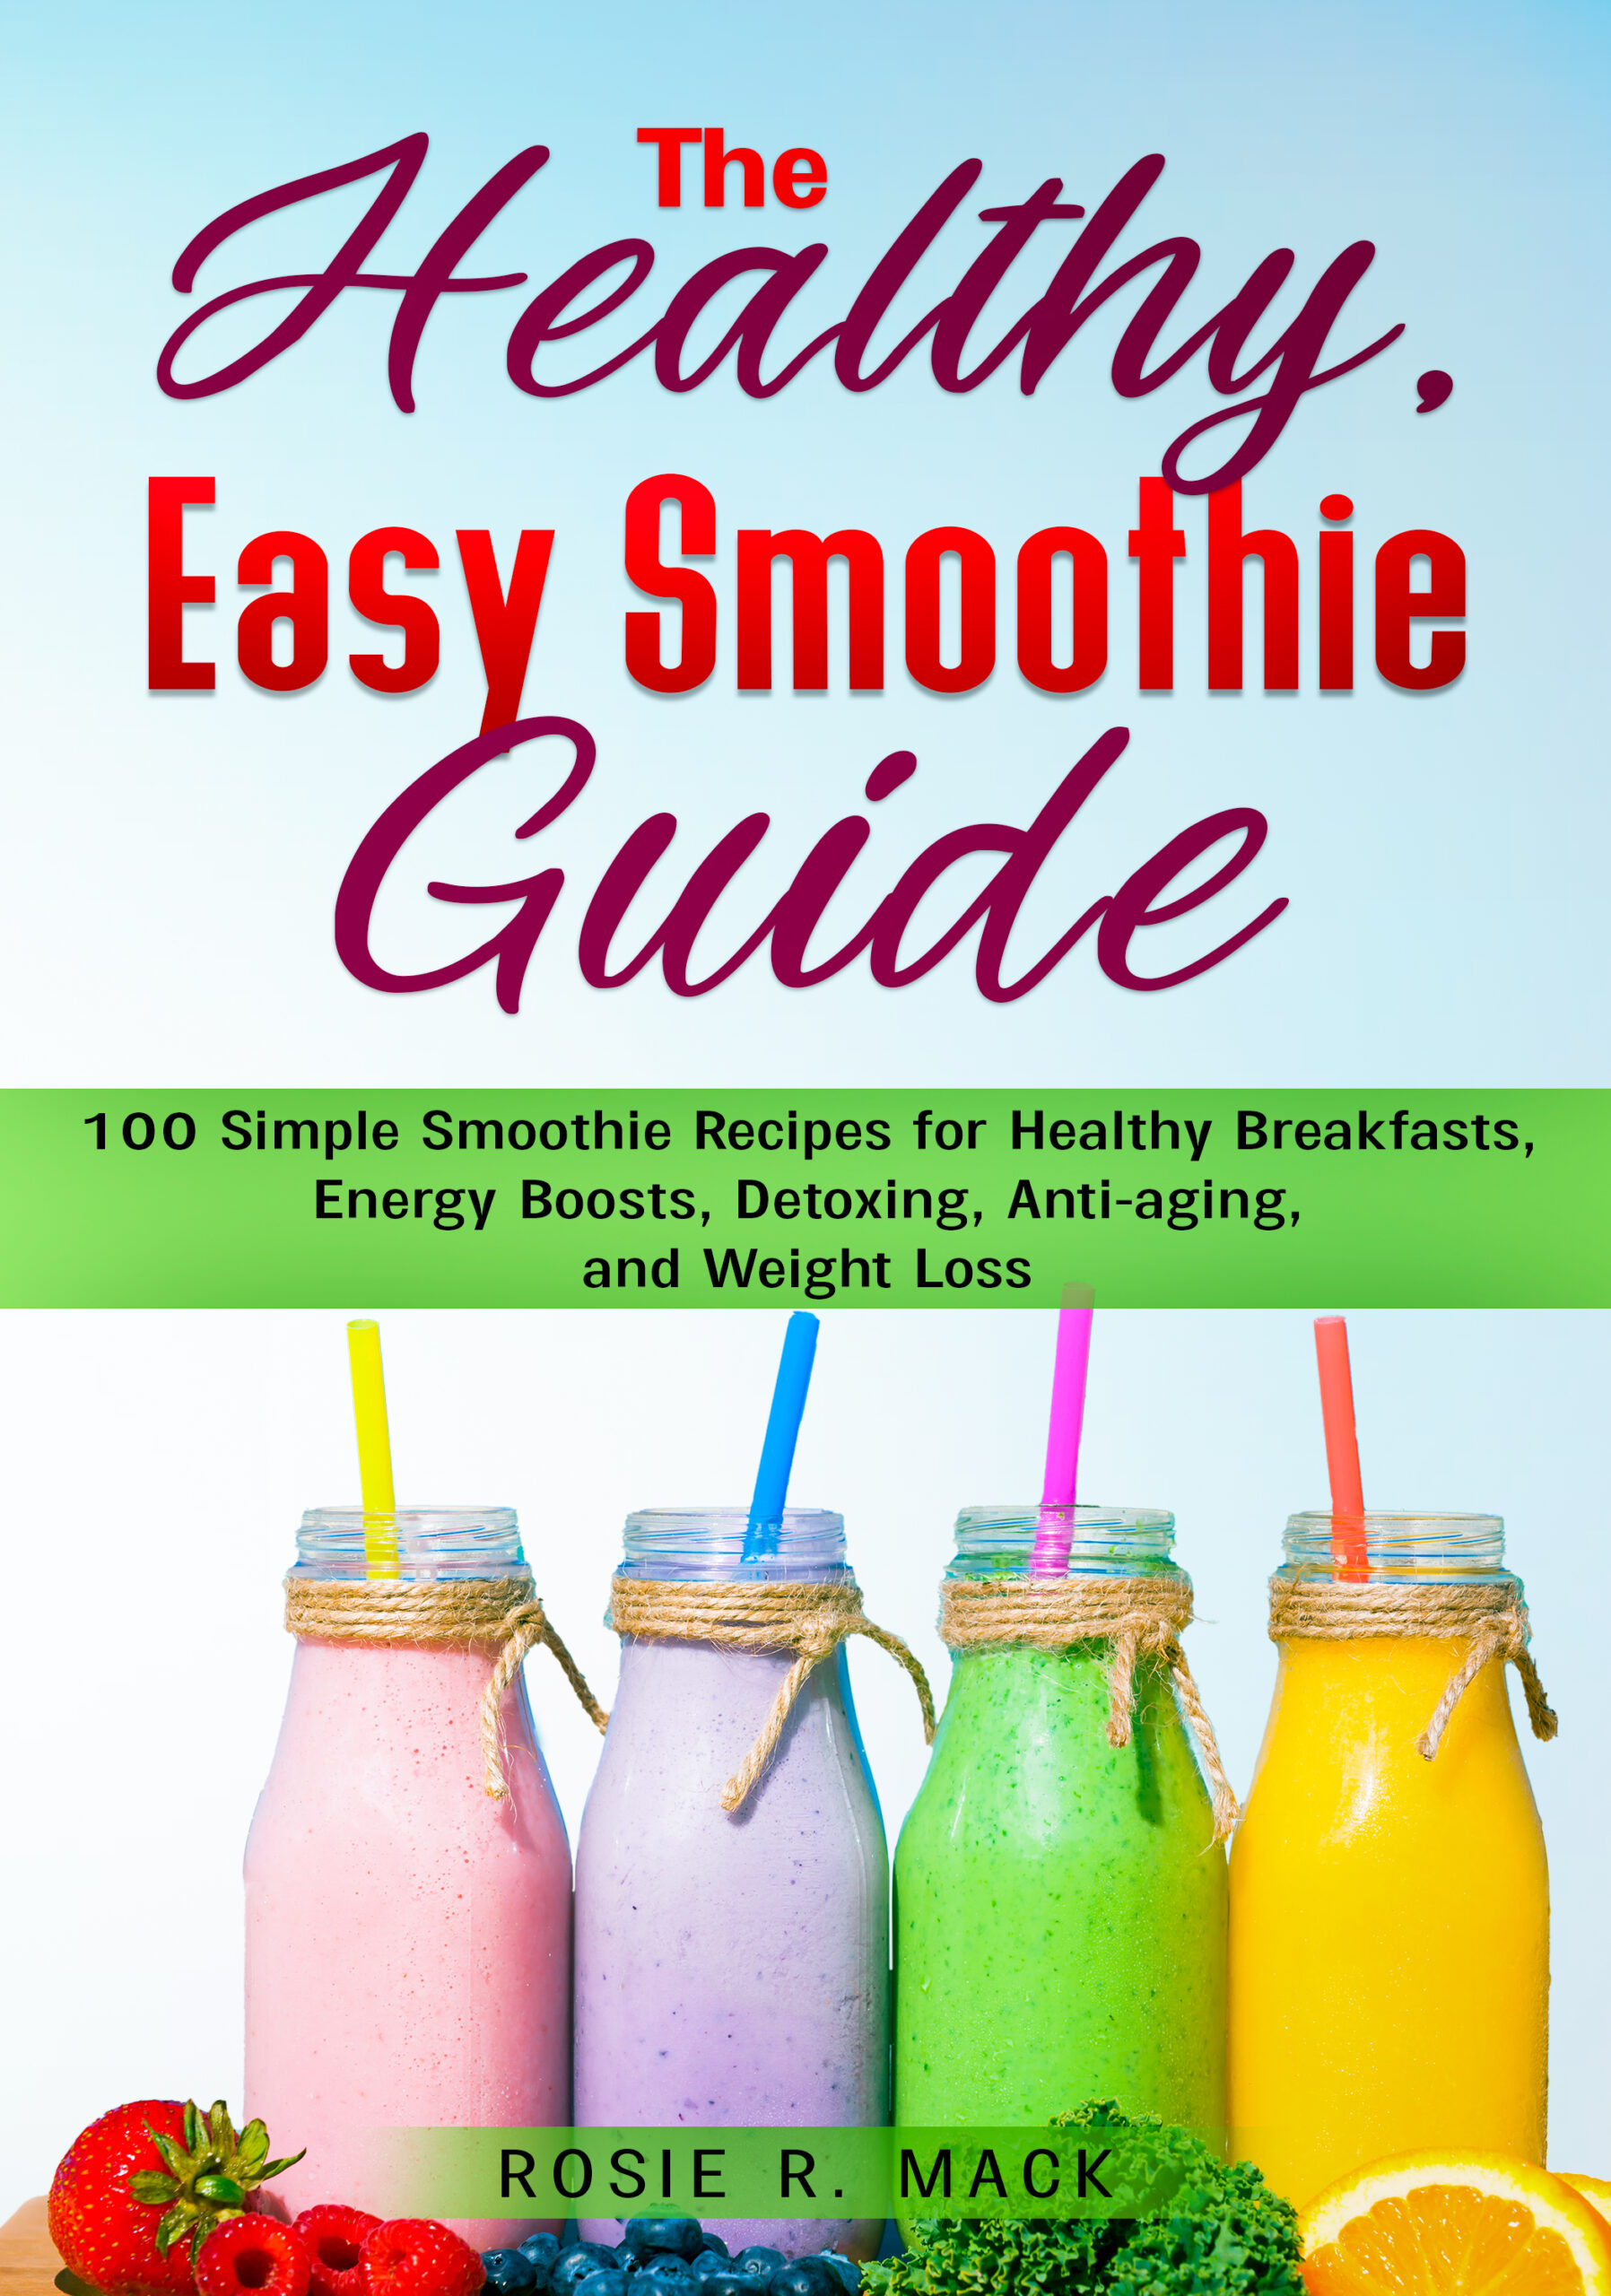 FREE: The Healthy, Easy Smoothies Guide: 100 Simple Smoothie Recipes for Healthy Breakfasts, Energy Boosts, Detoxing, Anti-aging, and Weight Loss by Rosie R. Mack